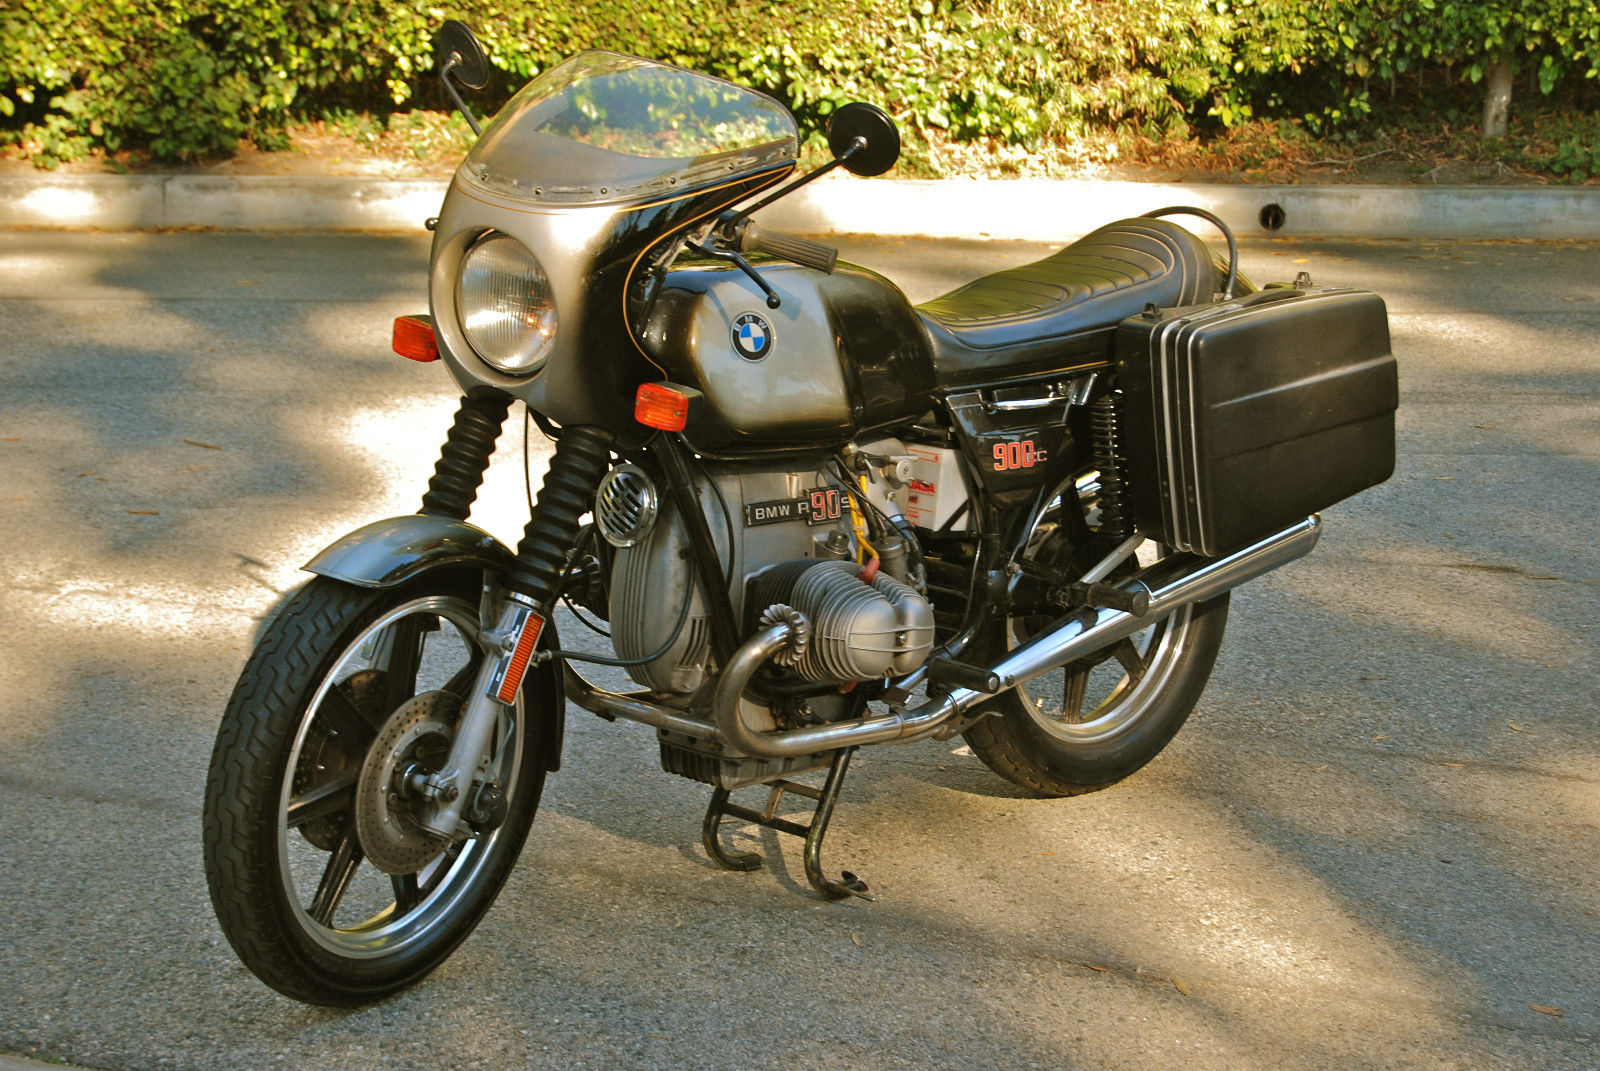 1976 Bmw r90s motorcycle #4